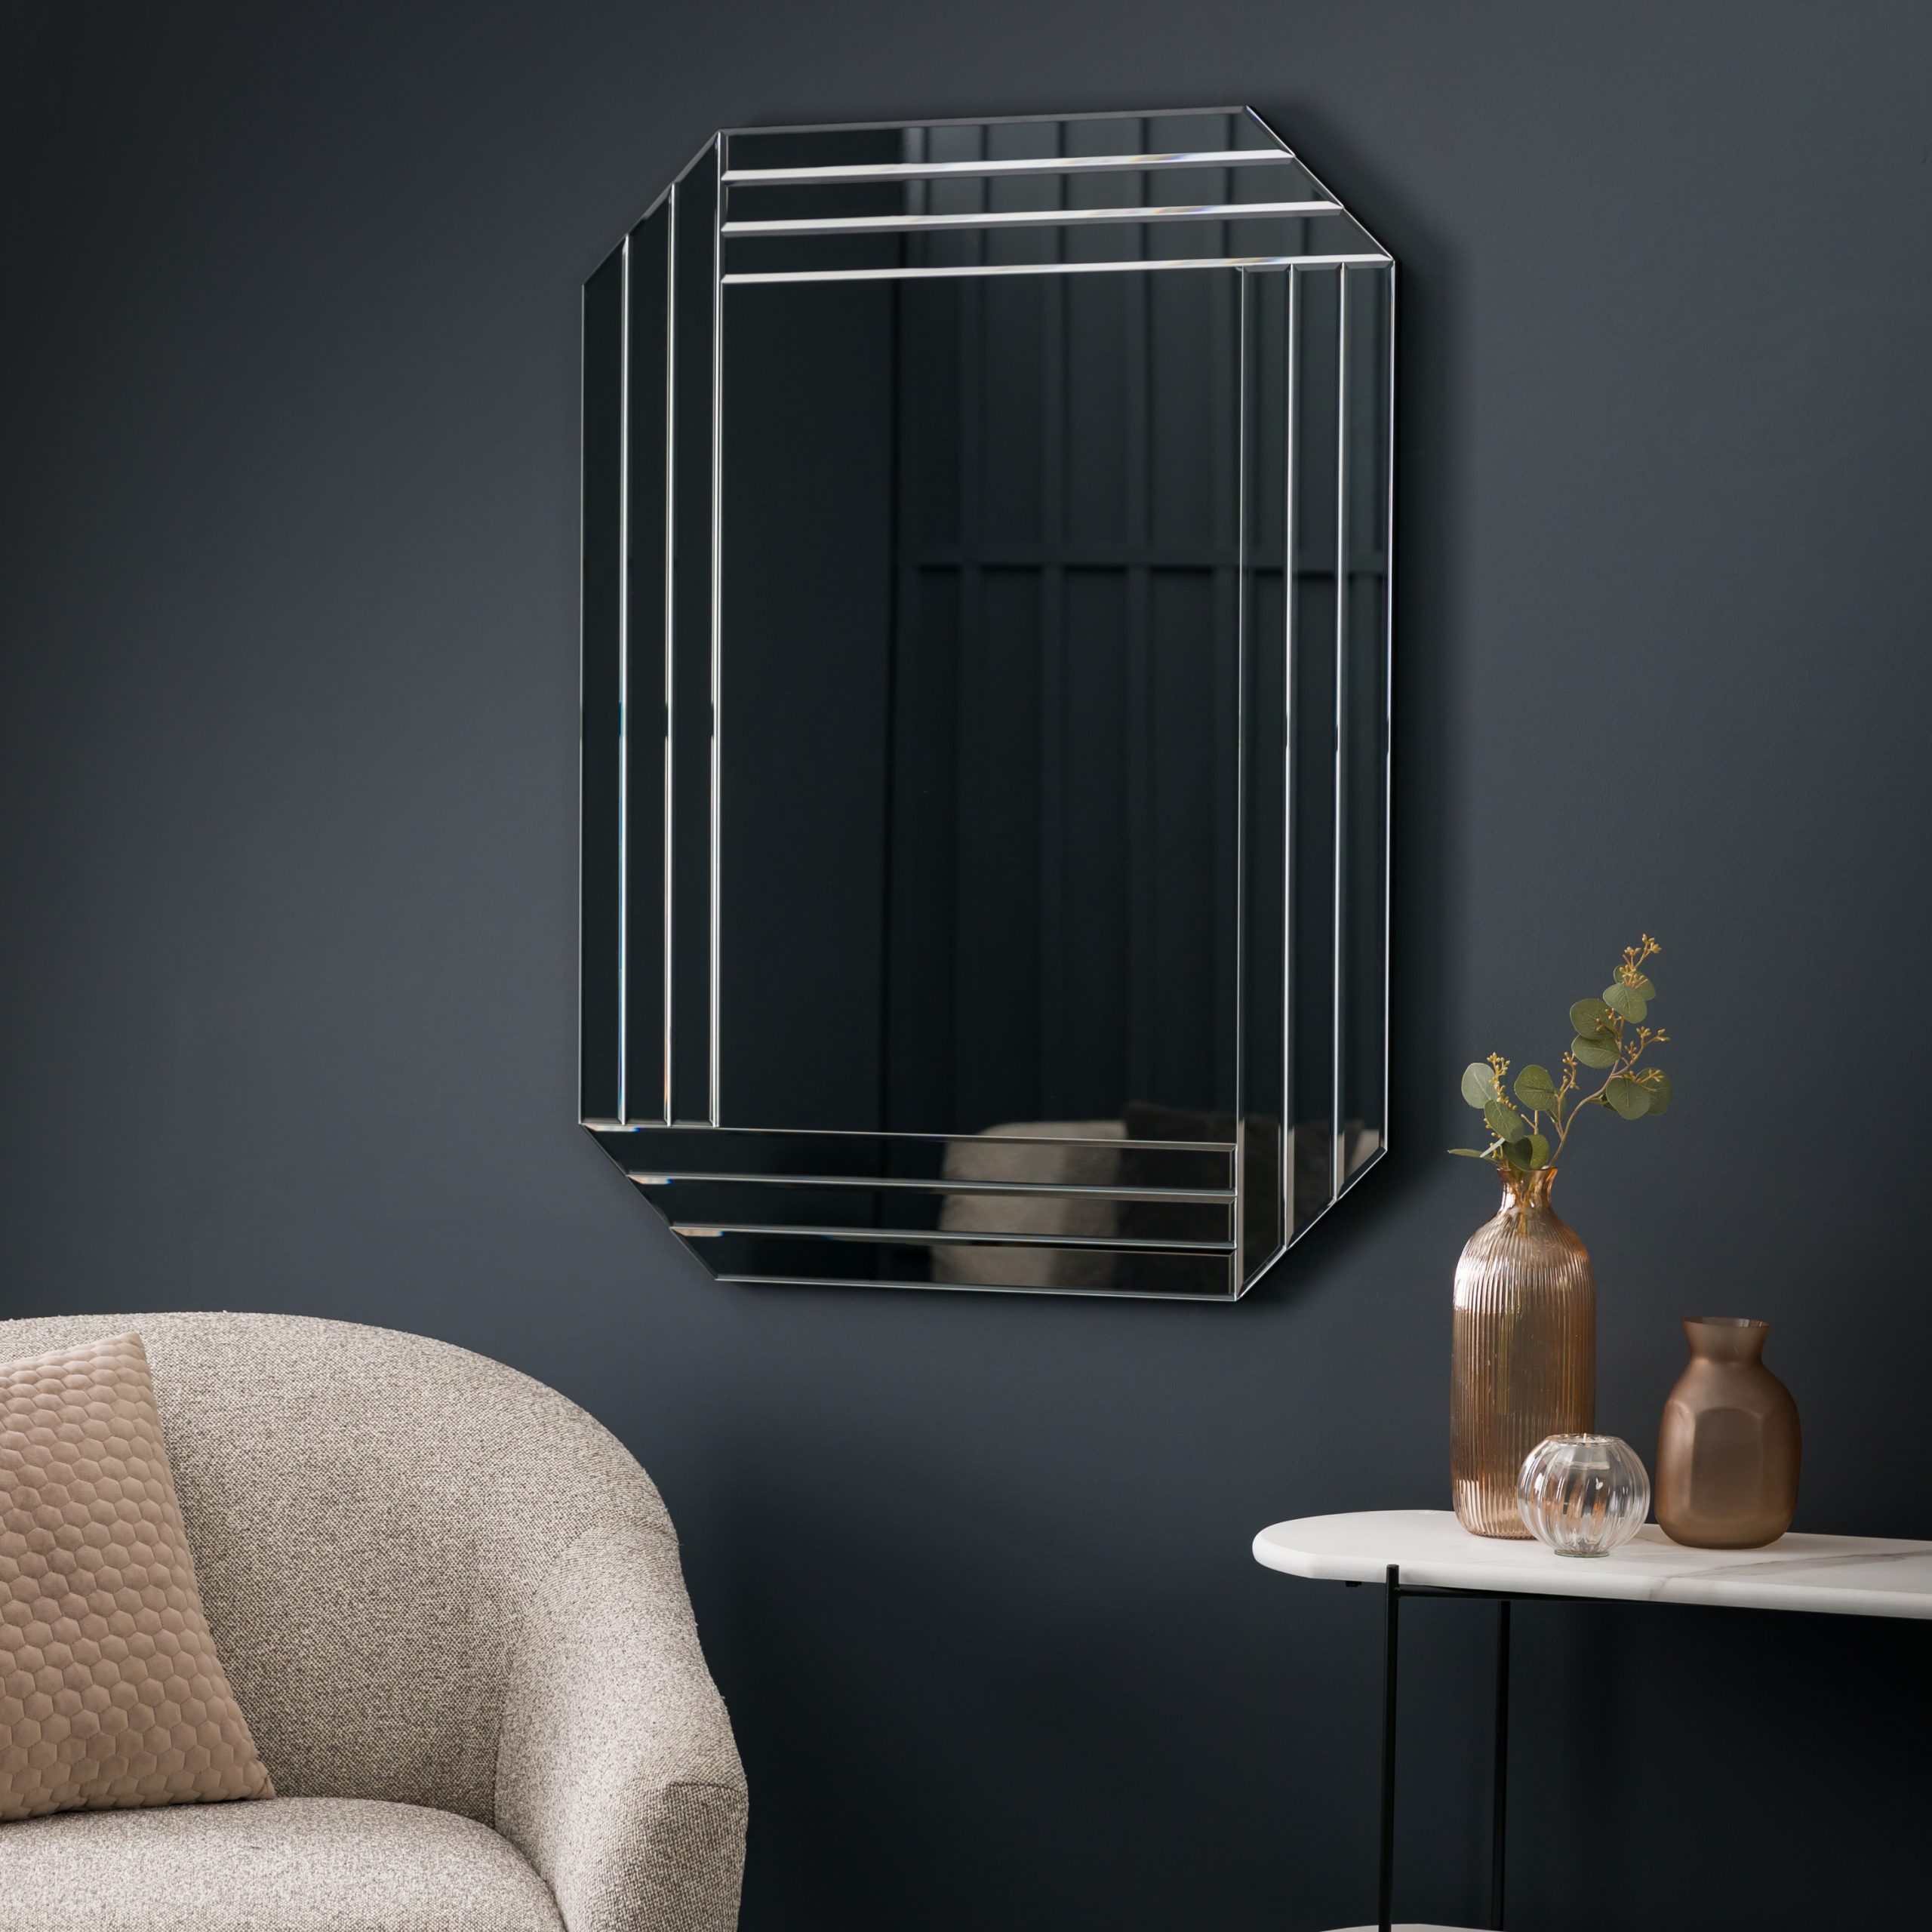 Gallery Direct Burgate Mirror | Shackletons